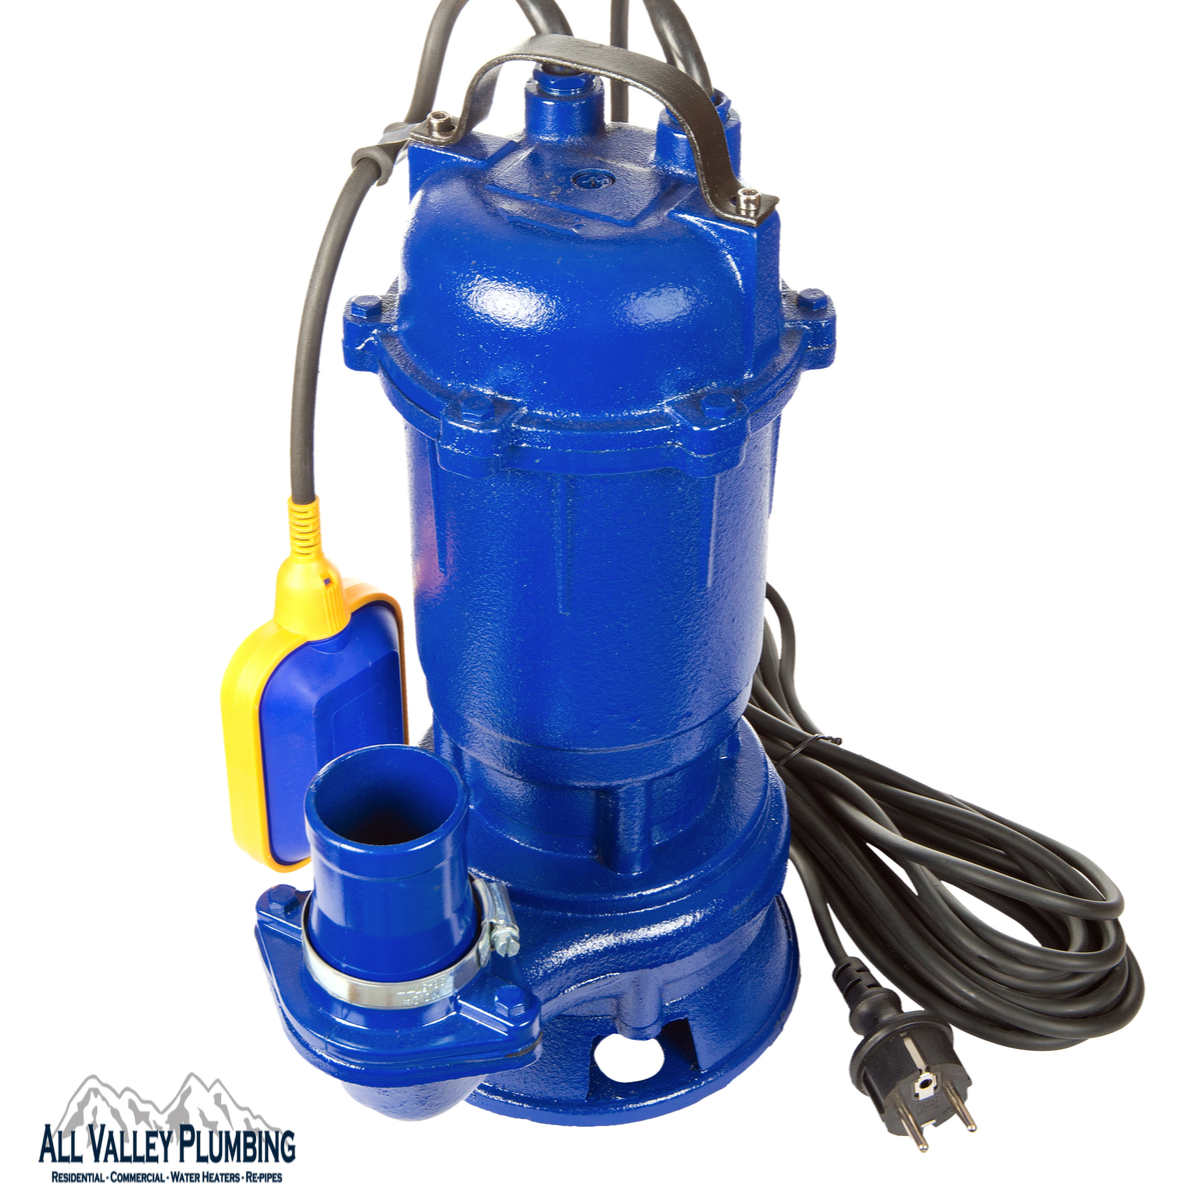 Is The Sump Pump On Your Mill Creek Property In Good Working Order?